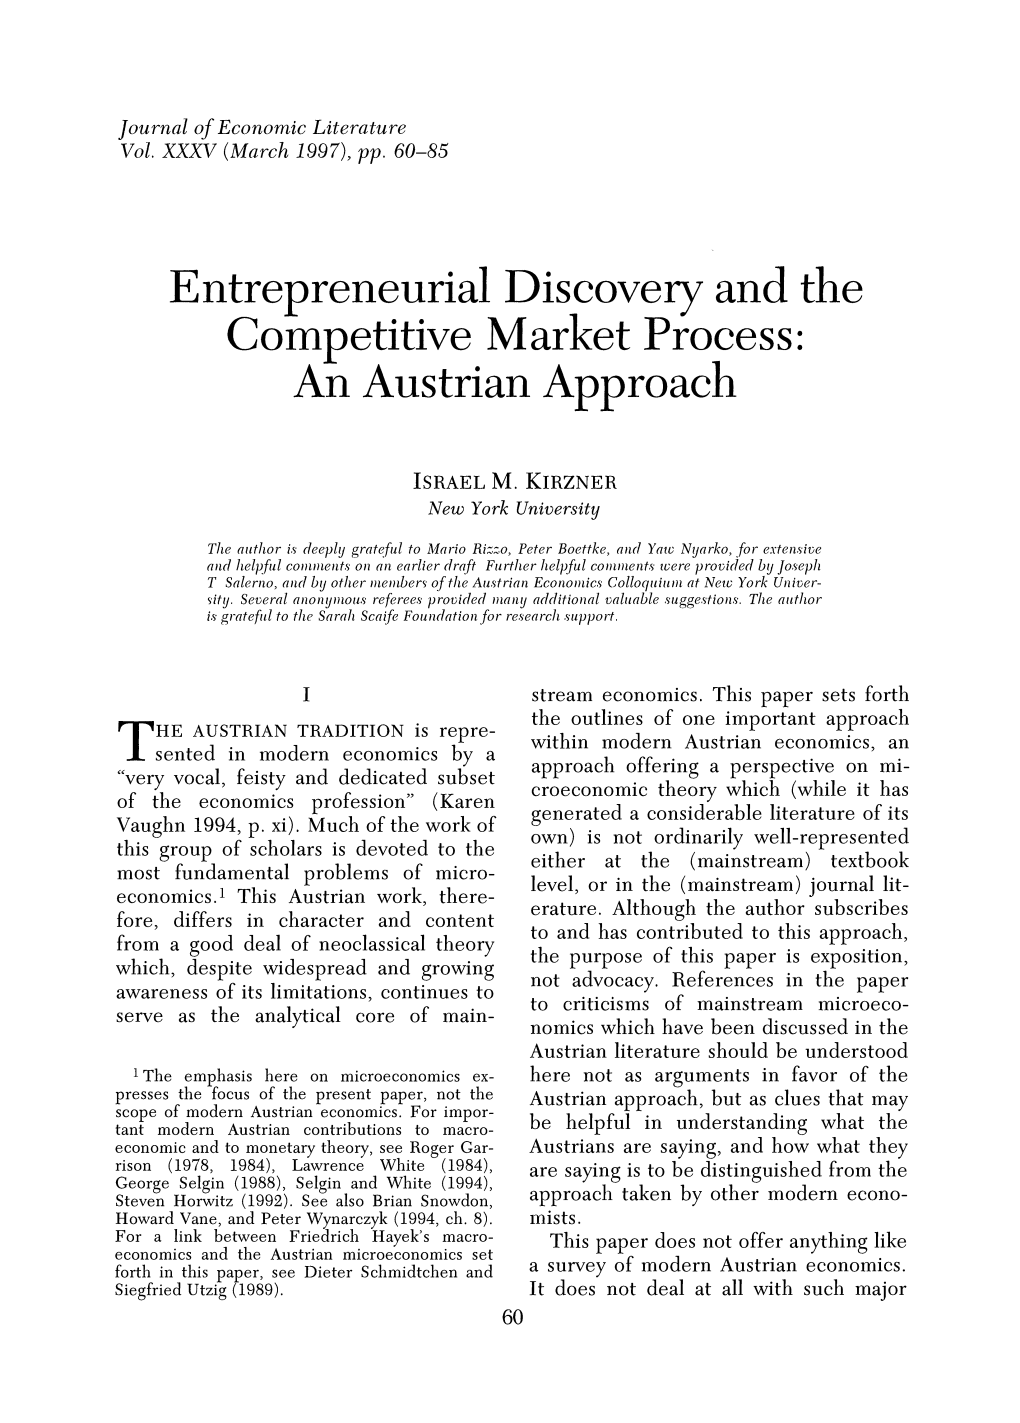 Entrepreneurial Discovery and the Competitive Market Process